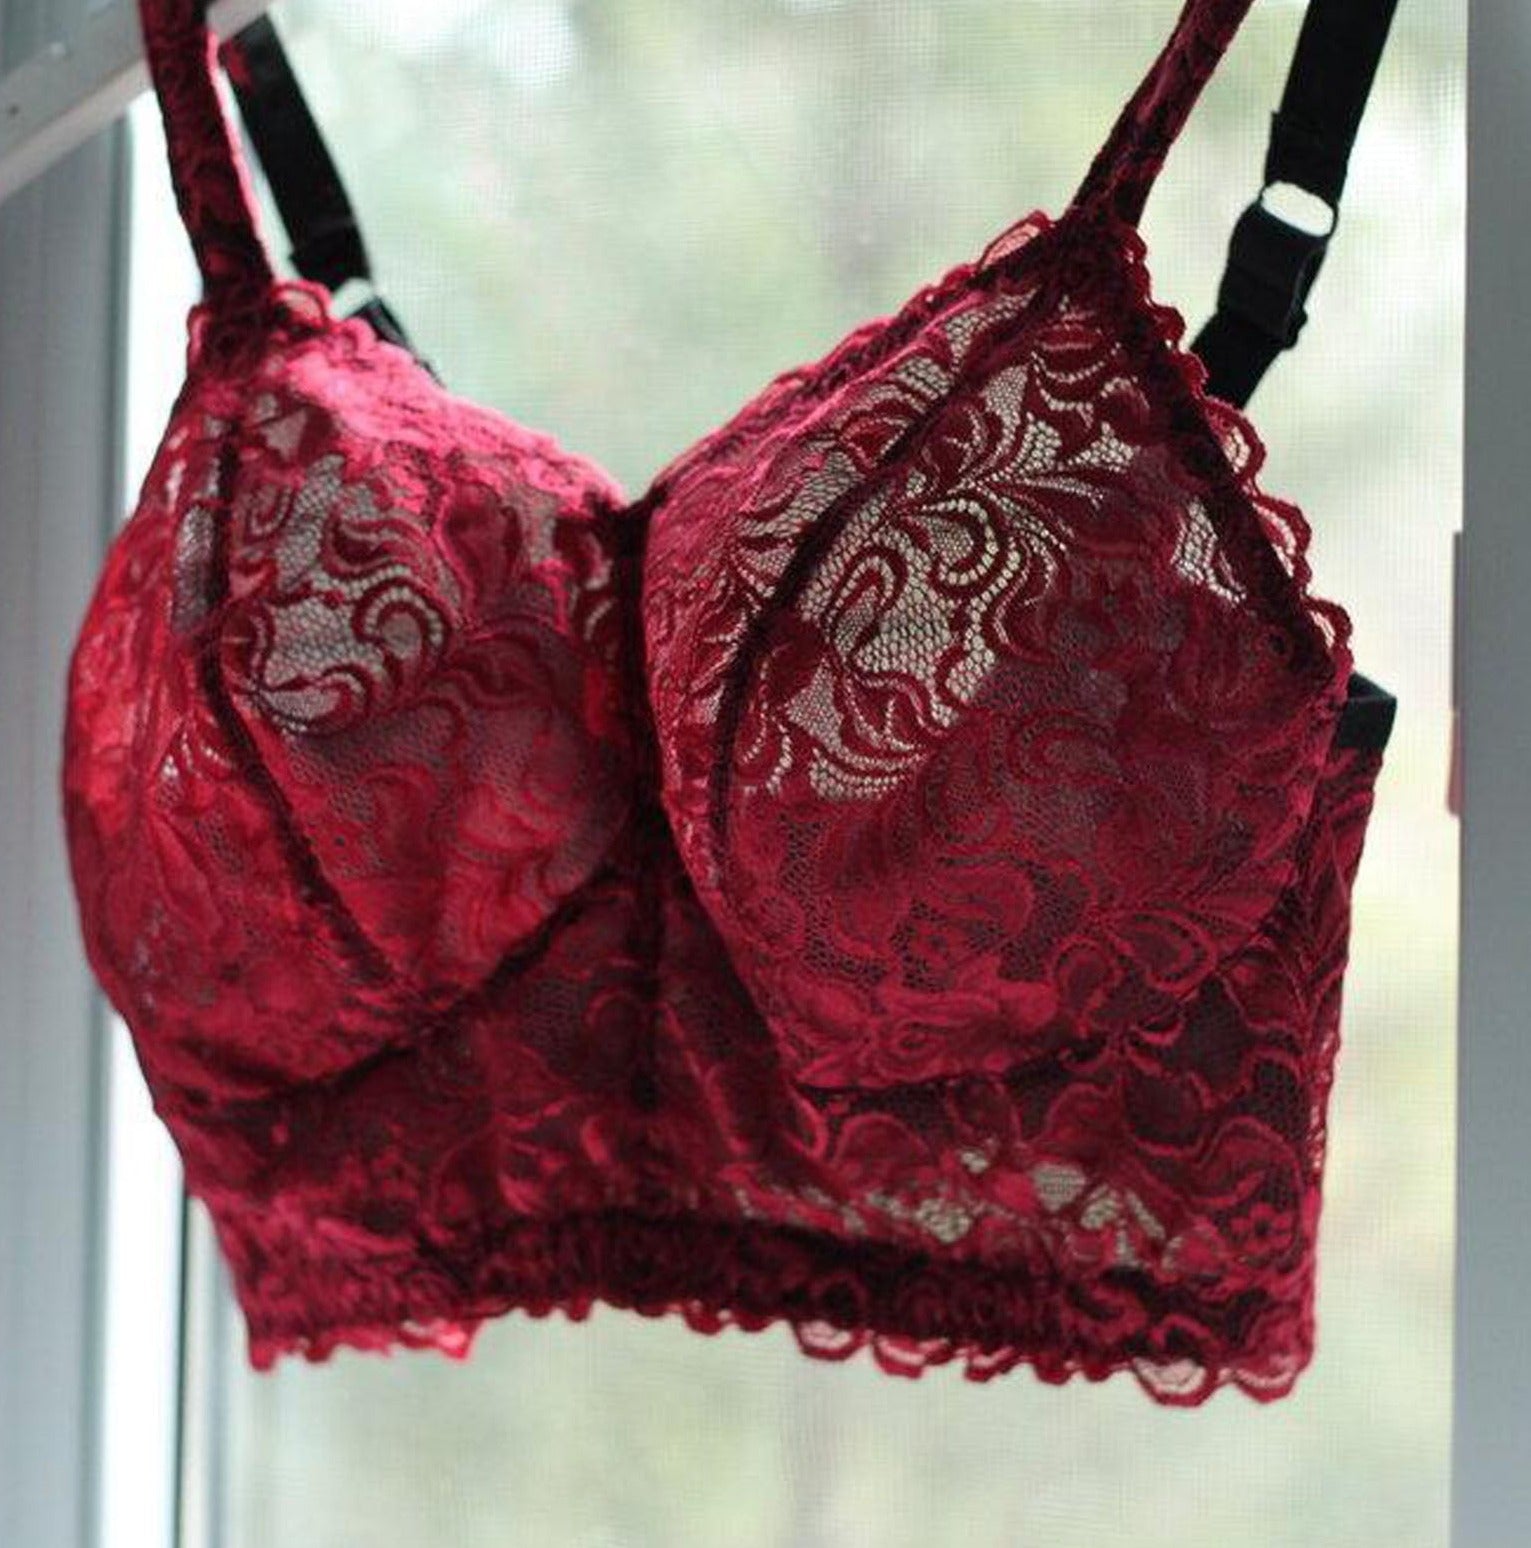 Custom made wireless bra in red scalloped lace fabric on a hanger, made to order by Rubies Bras.